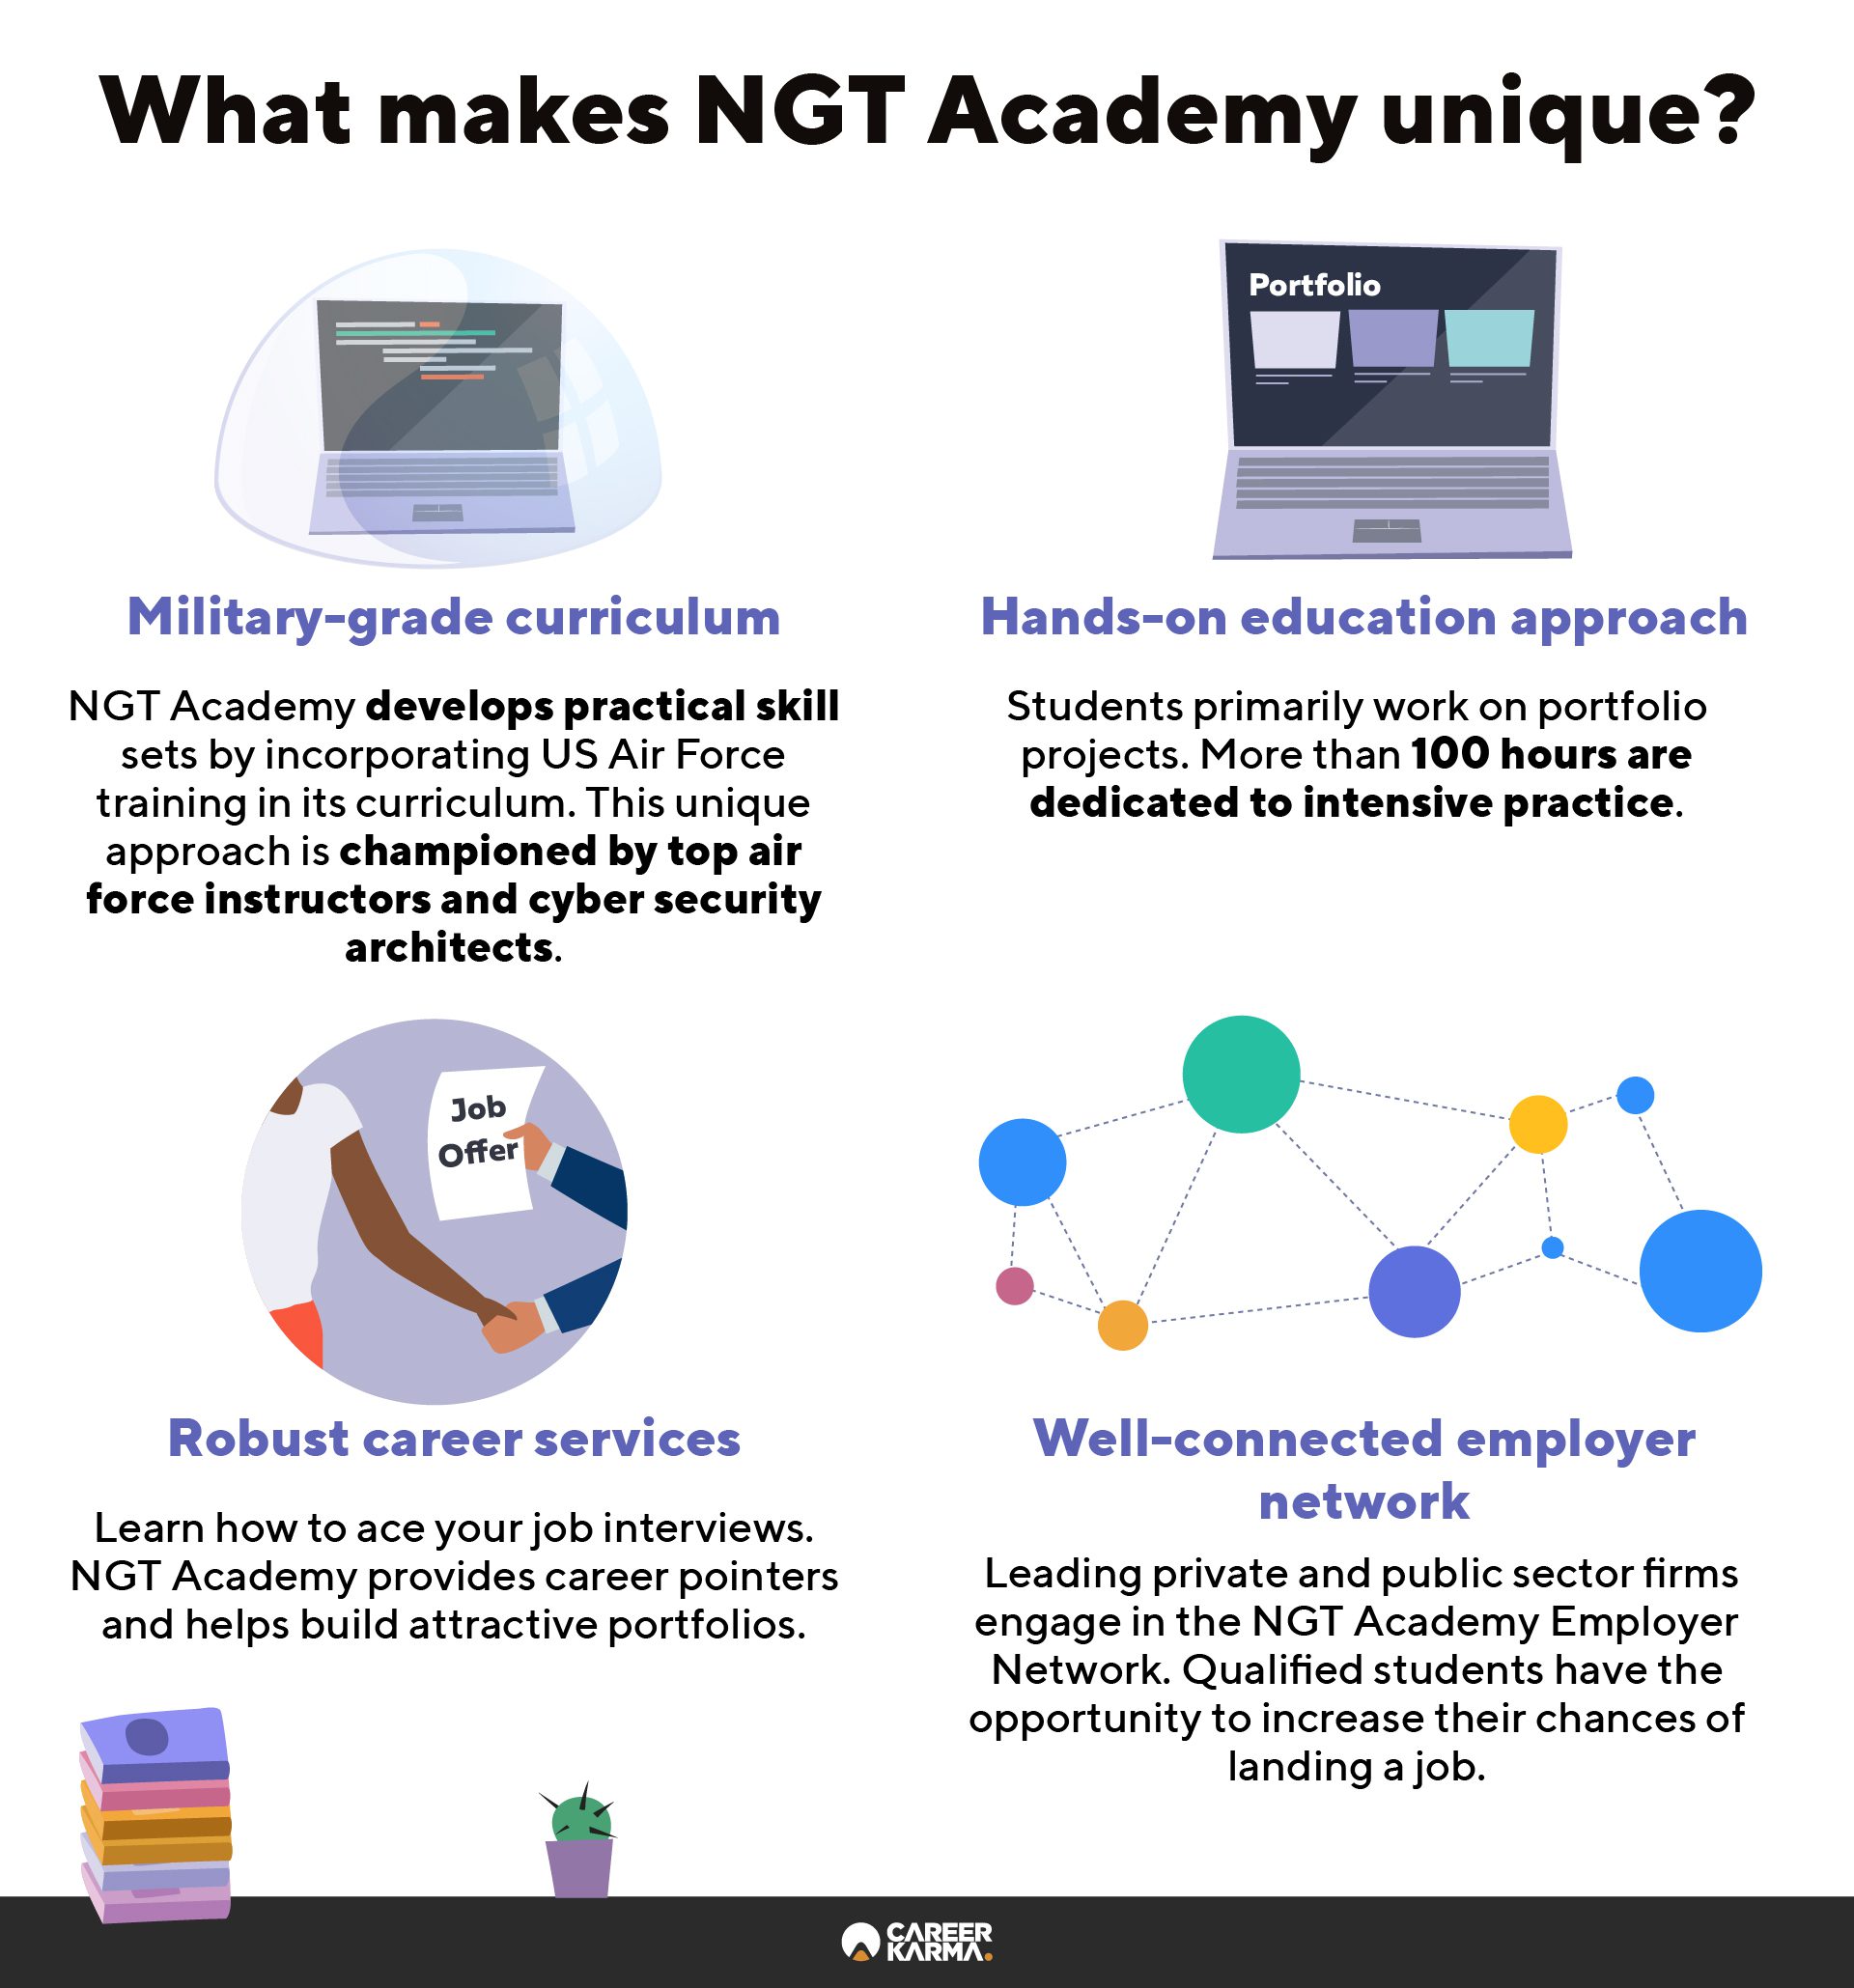 An infographic covering the key features of NGT Academy